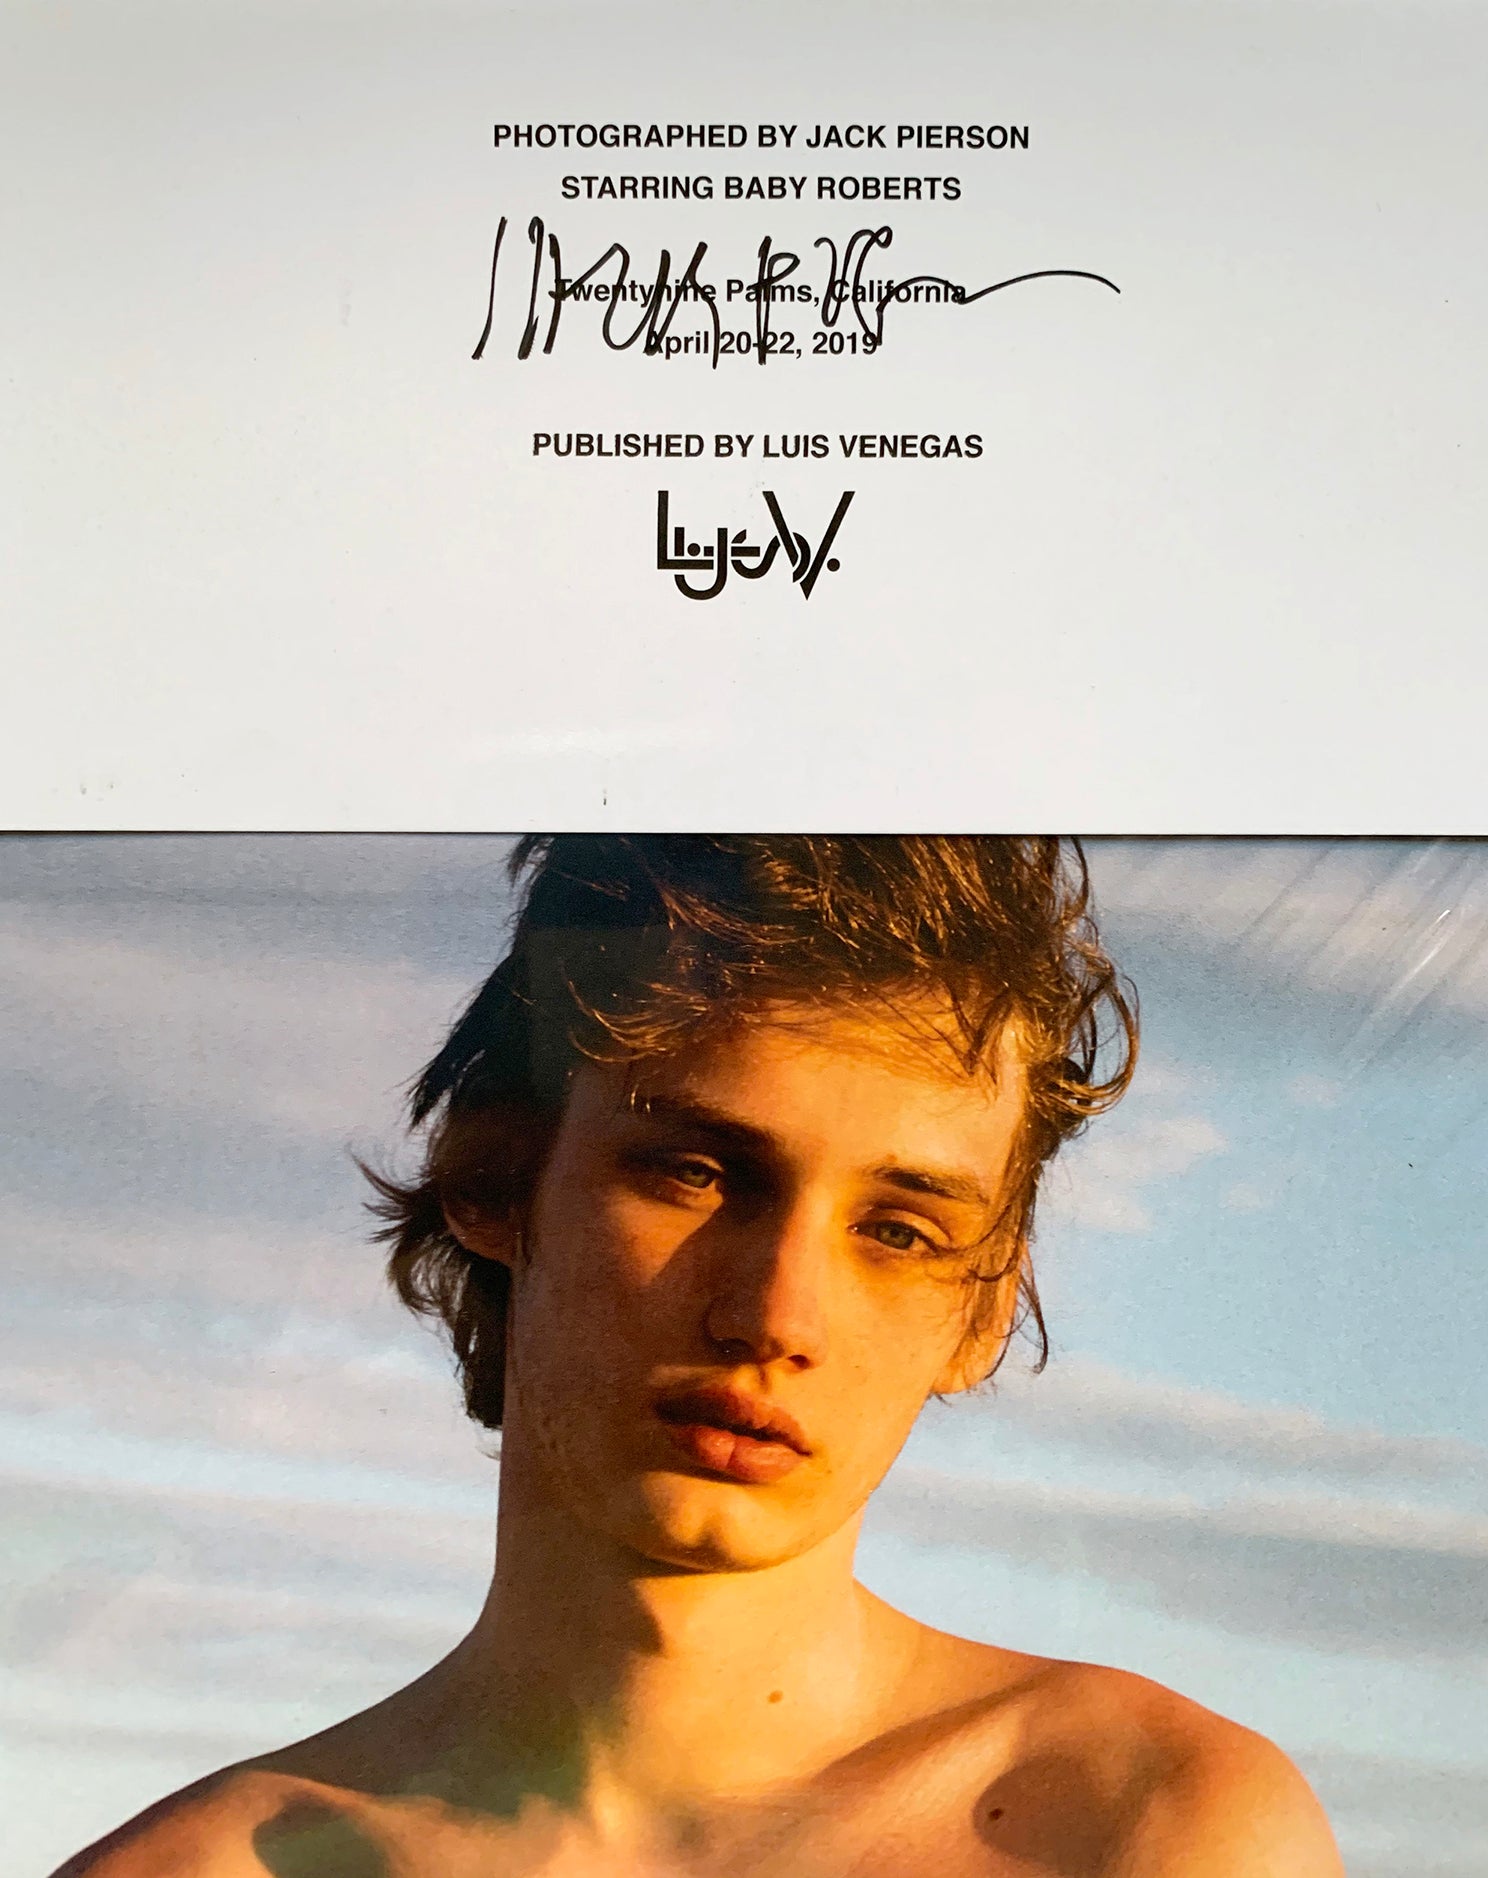 EXTRA SPECIAL SIGNED EDITION - 50 COPIES ONLY - EY! BOY COLLECTION  Volume 1 No.5  JACK PIERSON + BABY ROBERTS